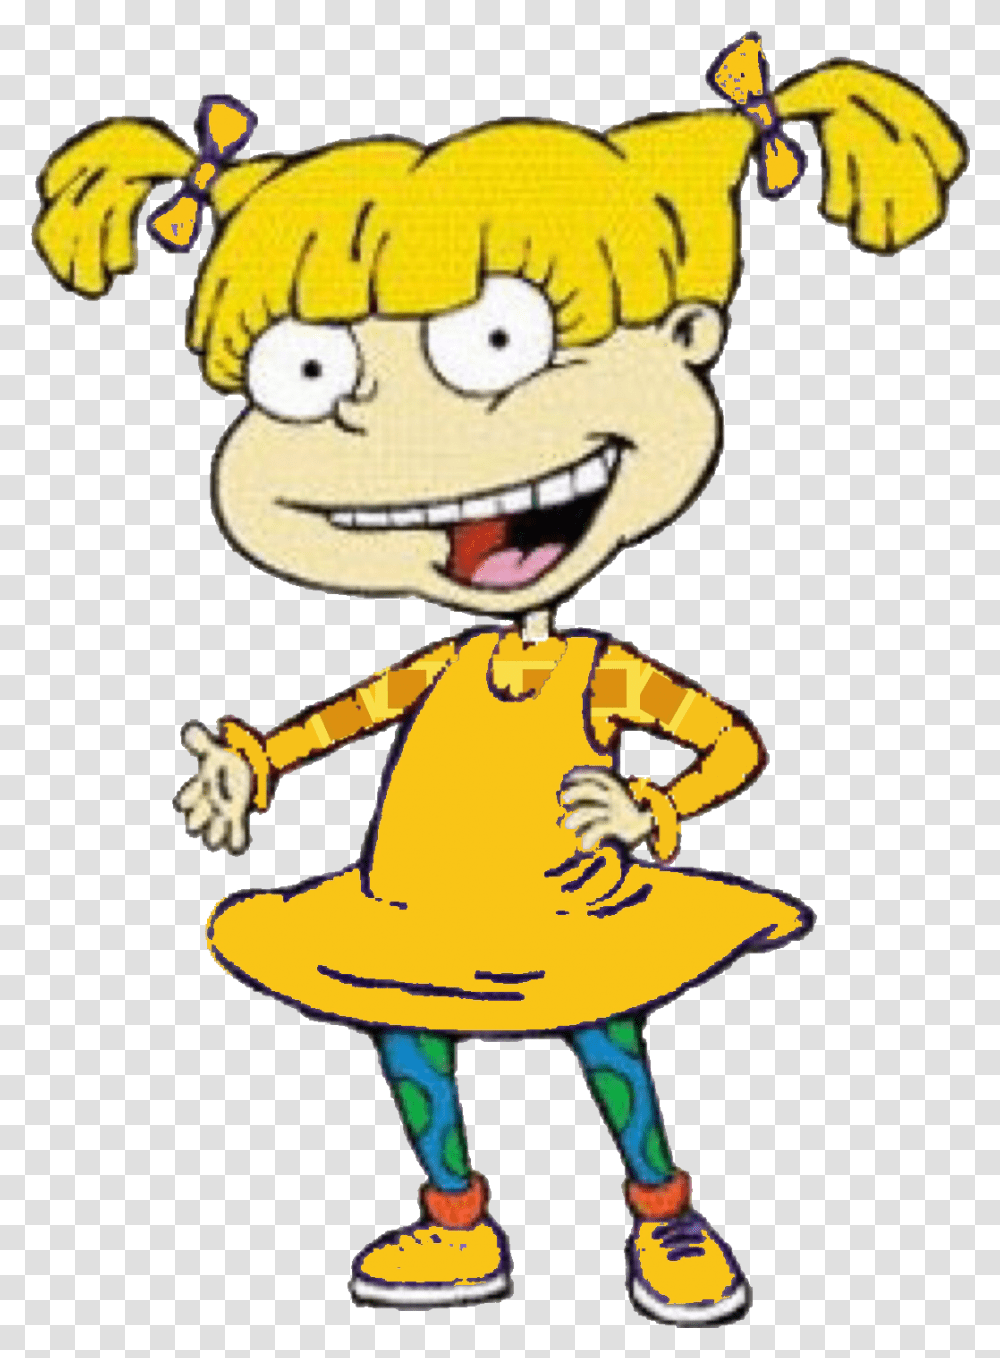 Angelica In Her Yellow Square Shrit Blues Clues Angelica, Person, Performer, Graphics, Art Transparent Png